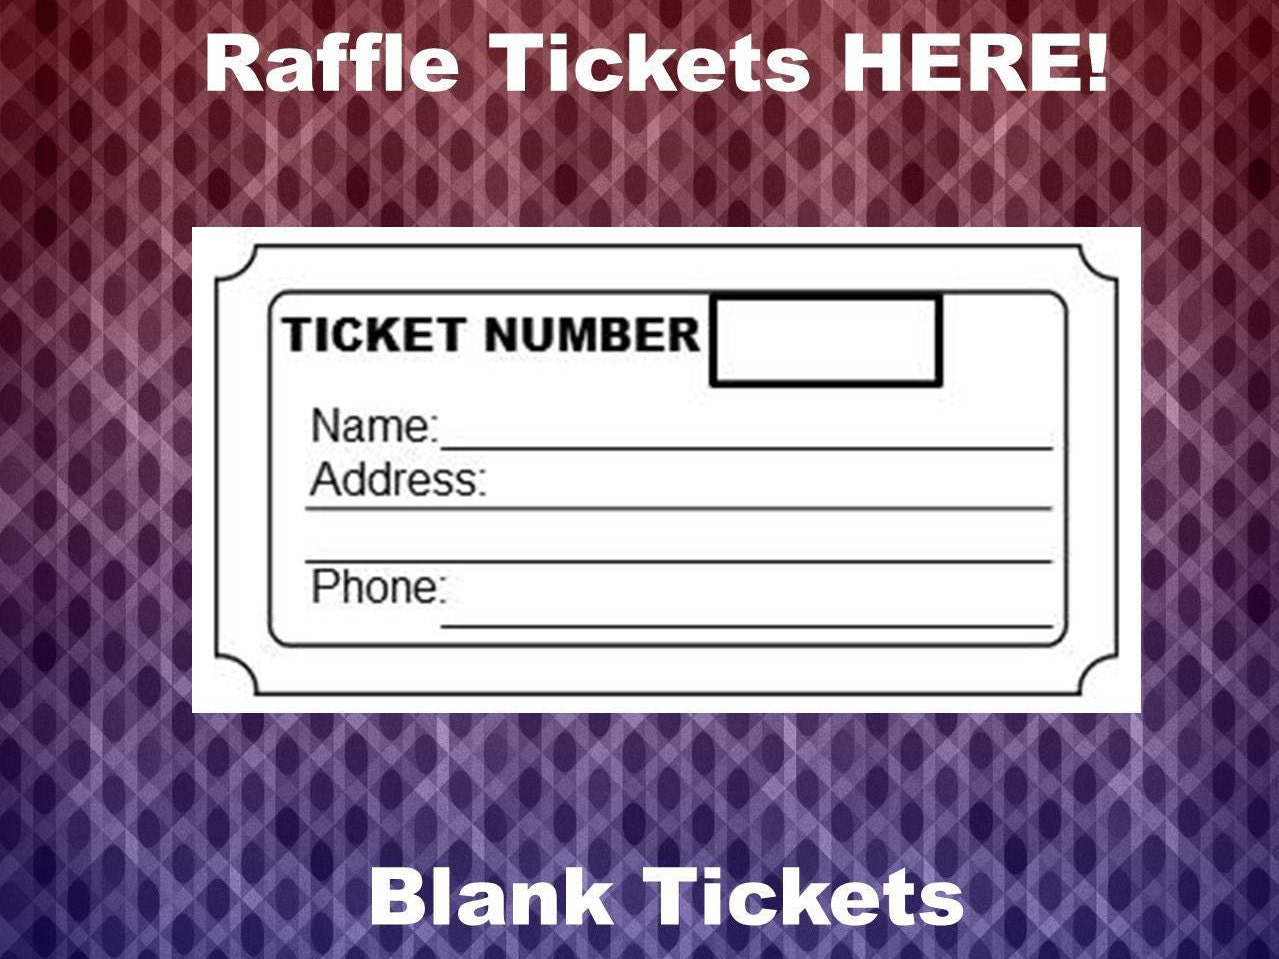 Raffle Ticket Template 8 Blank Raffle Tickets Per Page Party